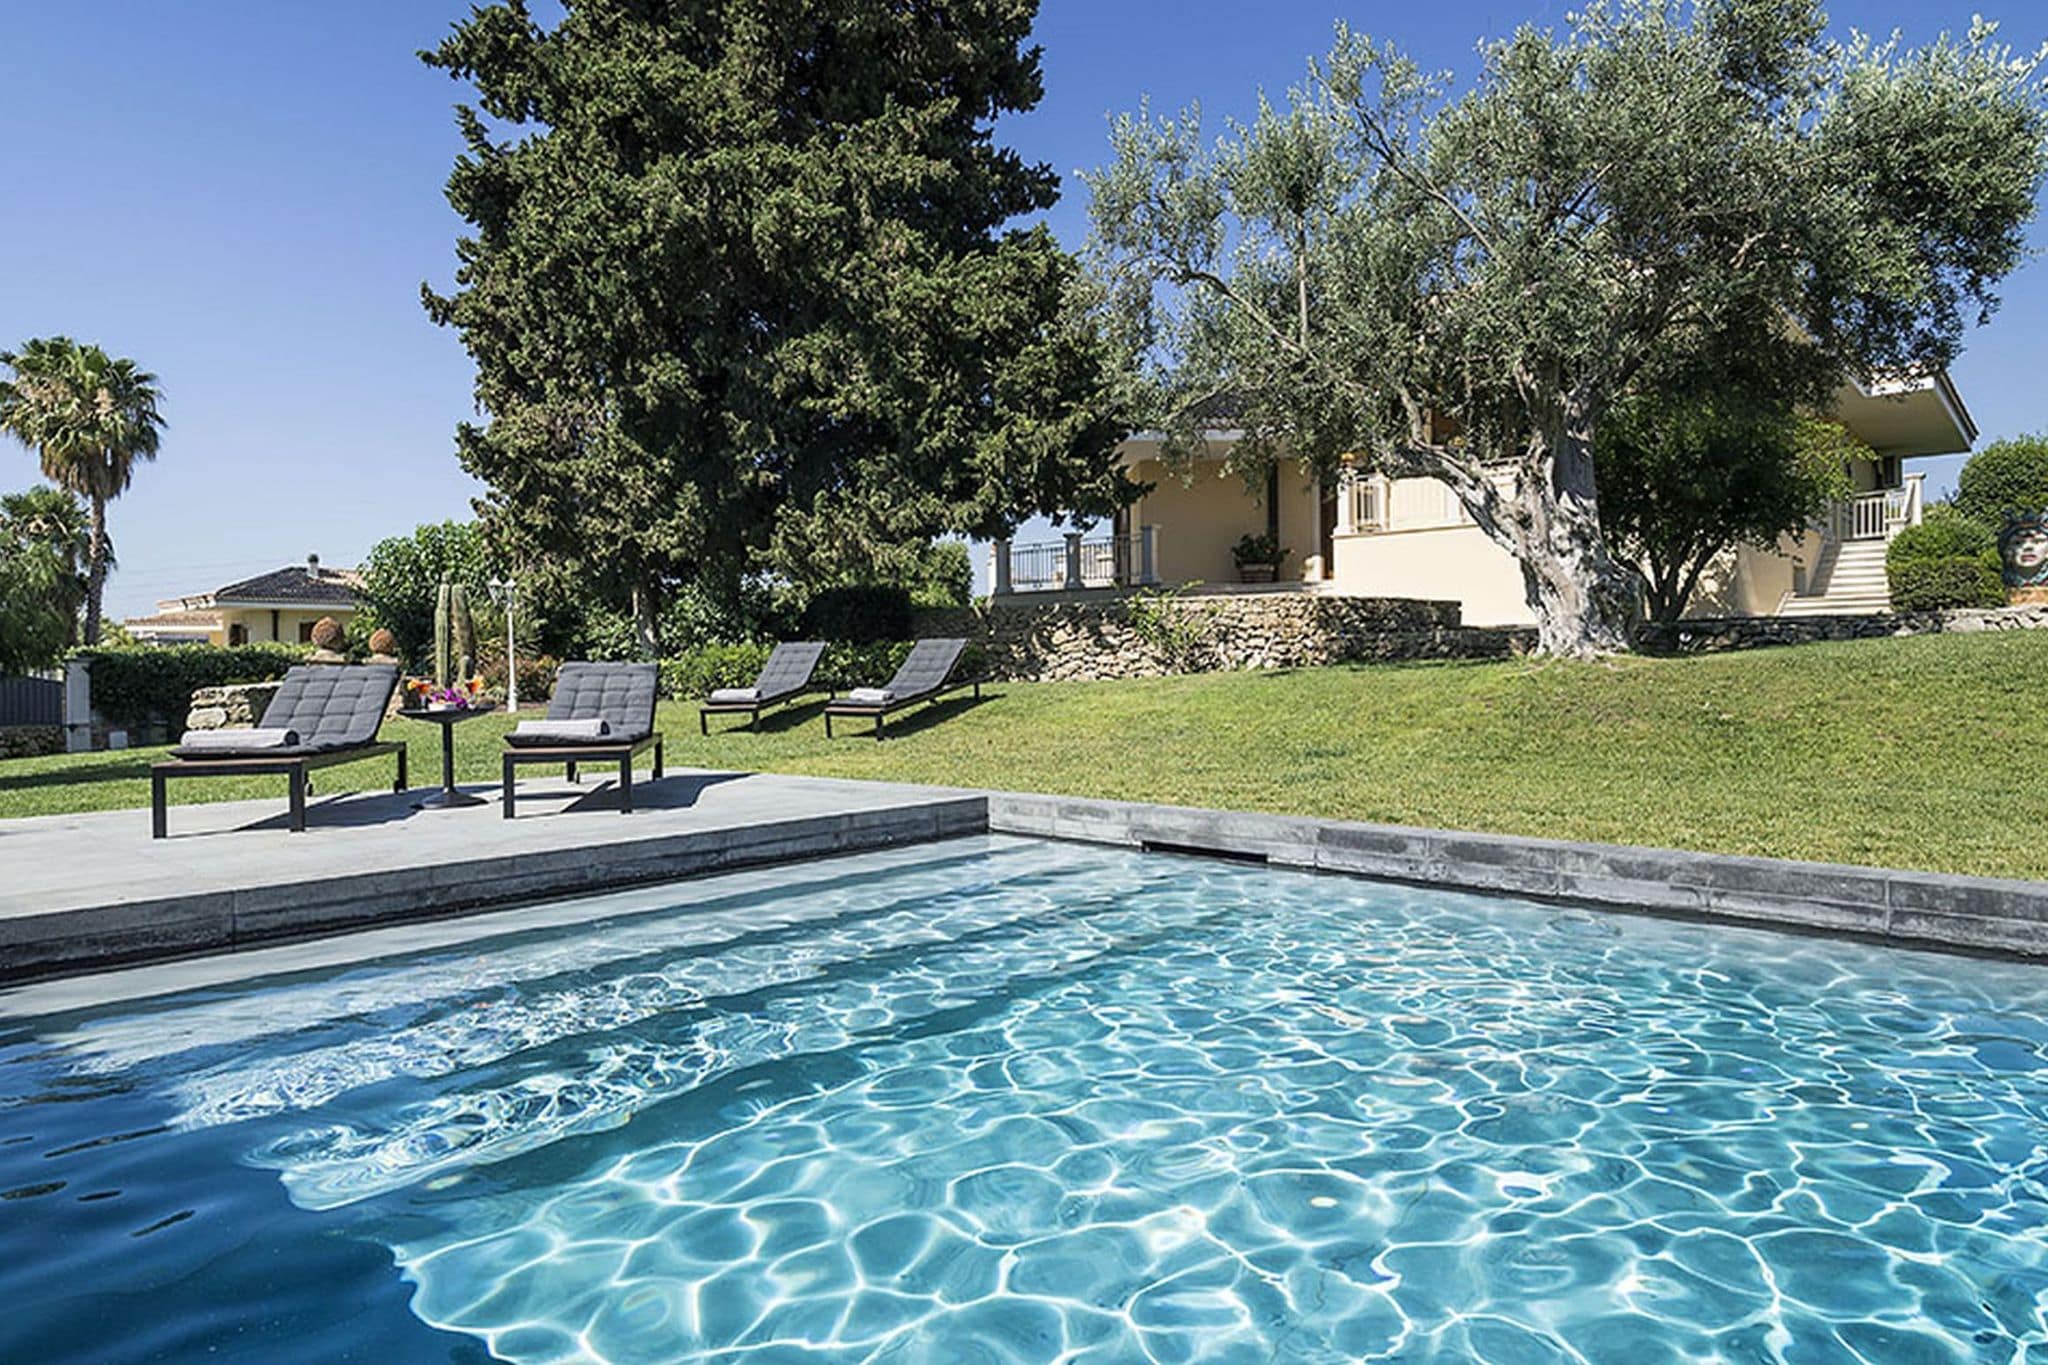 Lovely luxury villa with private pool just a few km from the center of Syracuse